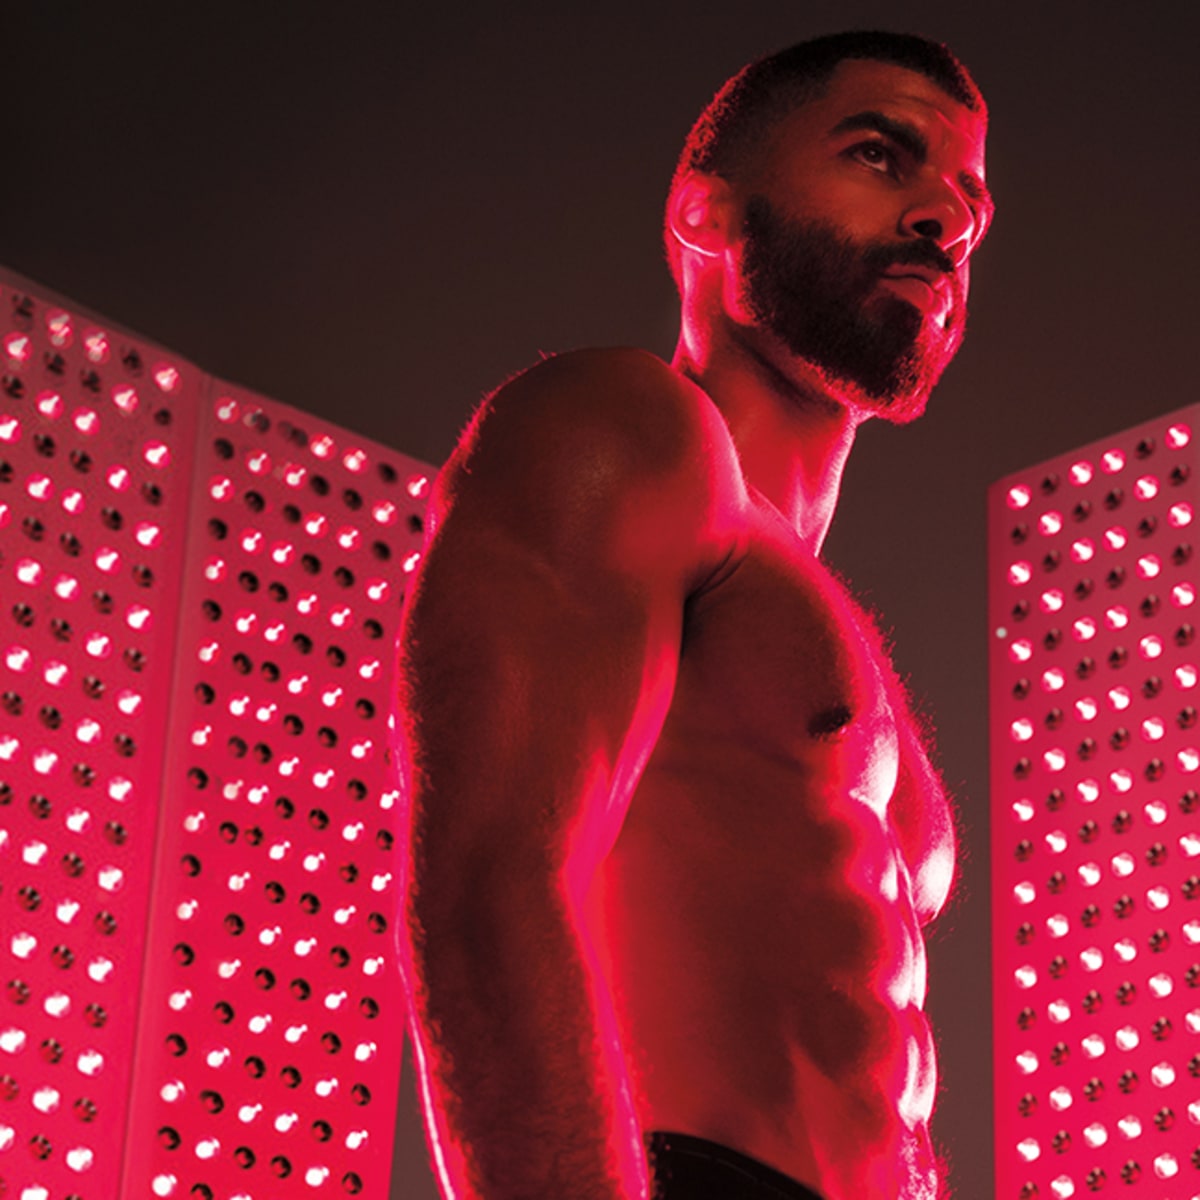 Incorporating​ Red Light Therapy into Your Training Routine